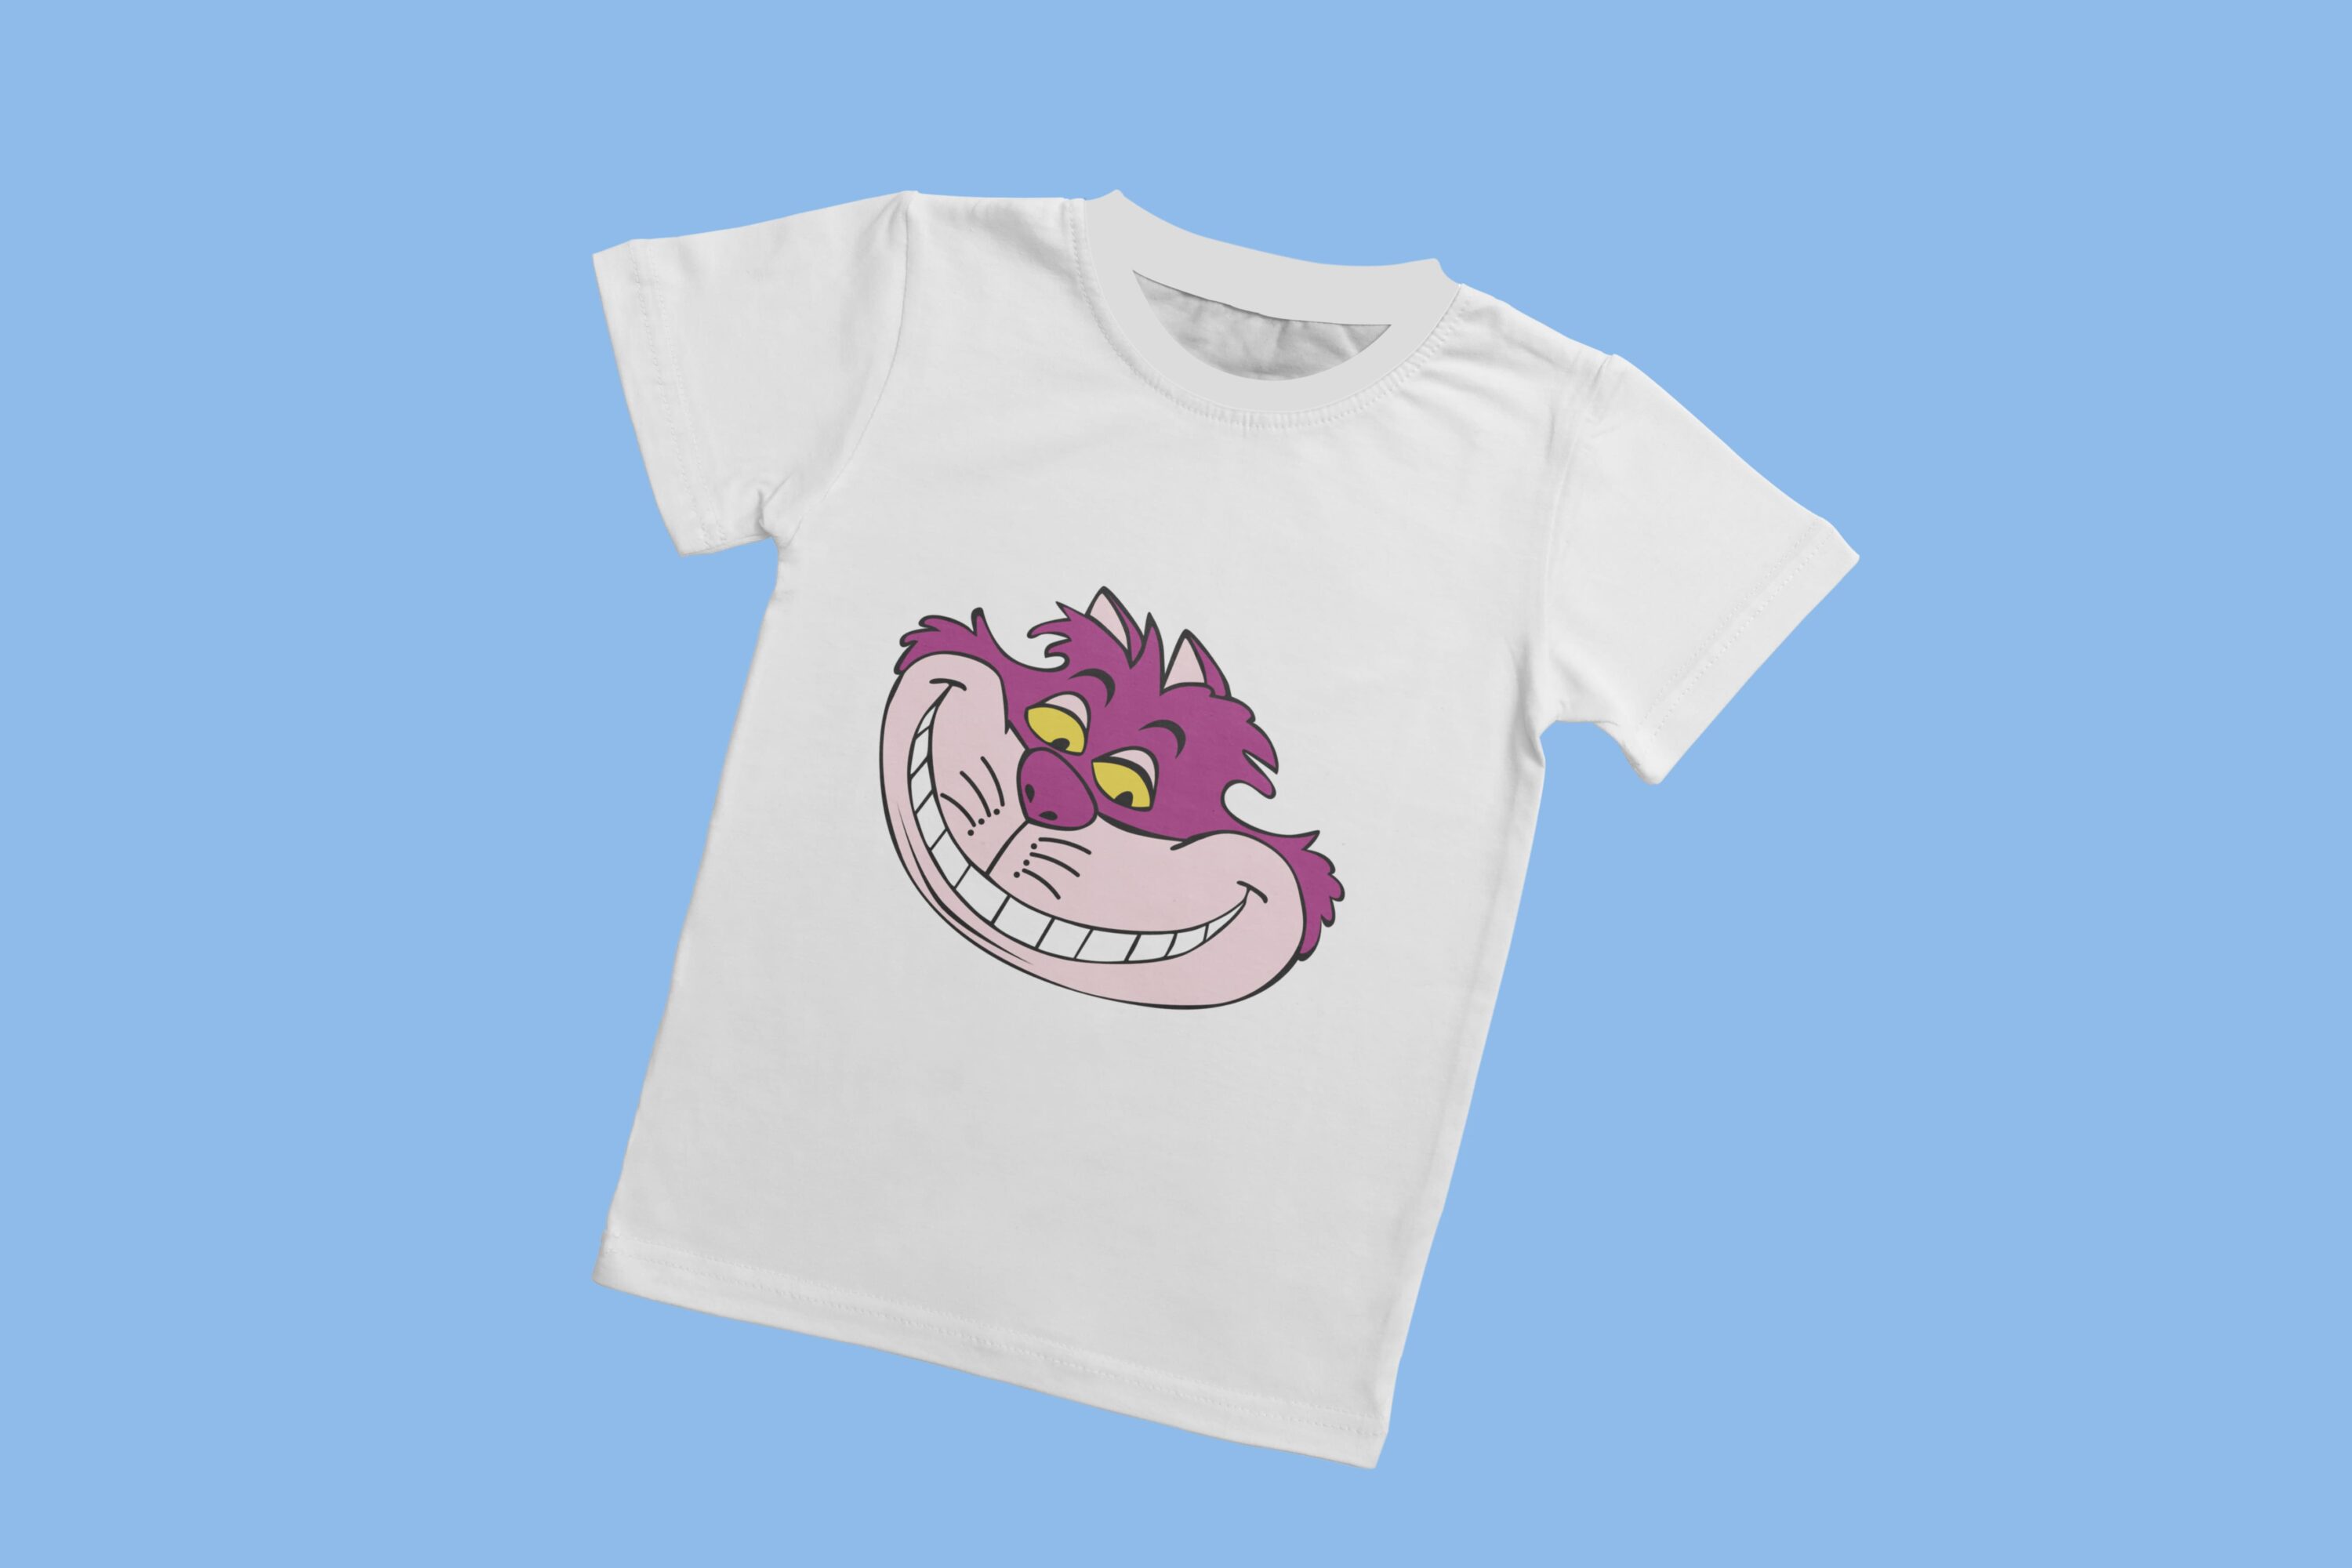 White T-shirt with a white collar and the face of the Cheshire cat, which looks in the lower right corner, on a blue background.